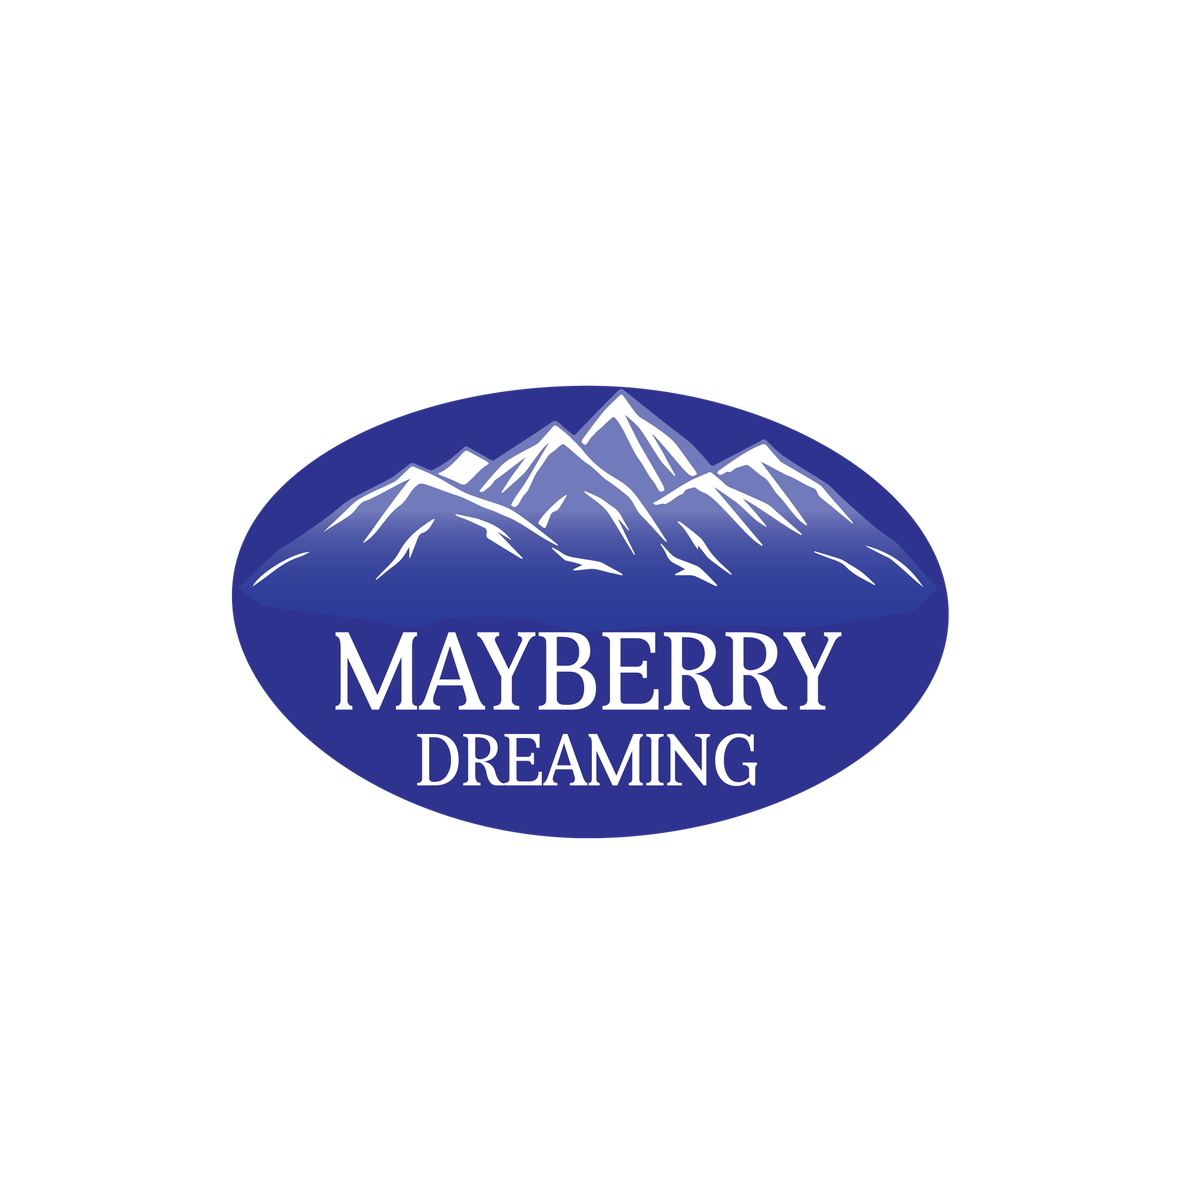 Mayberry Dreaming